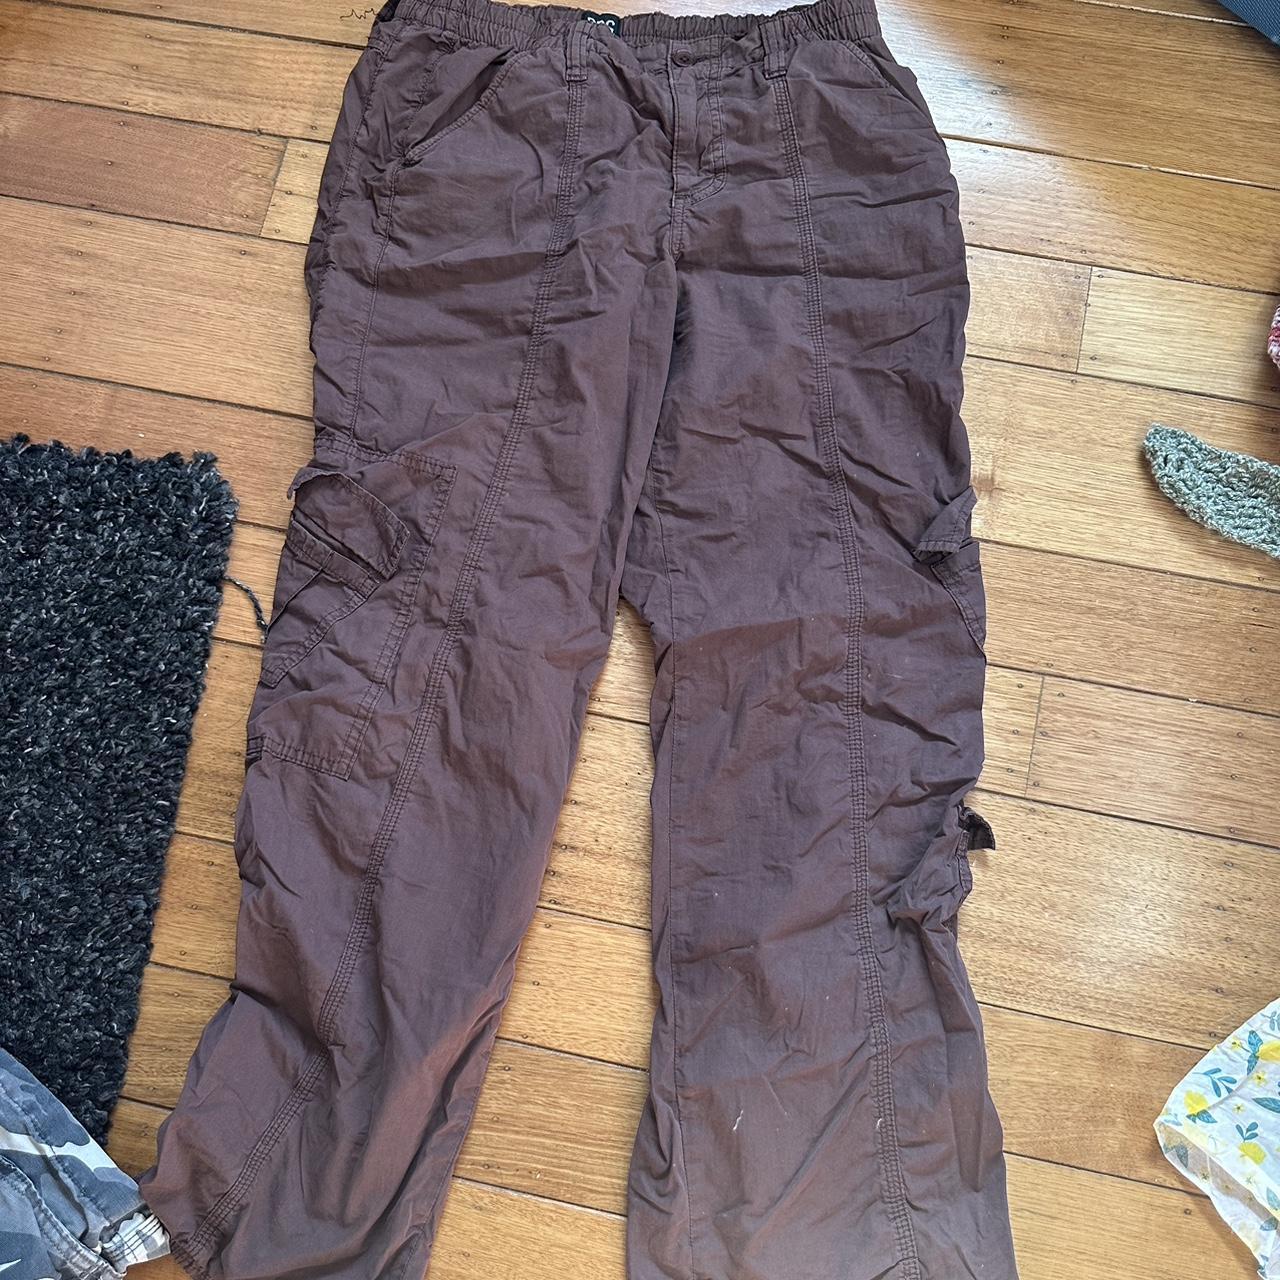 Urban outfitters oversized cargos in medium! The... - Depop